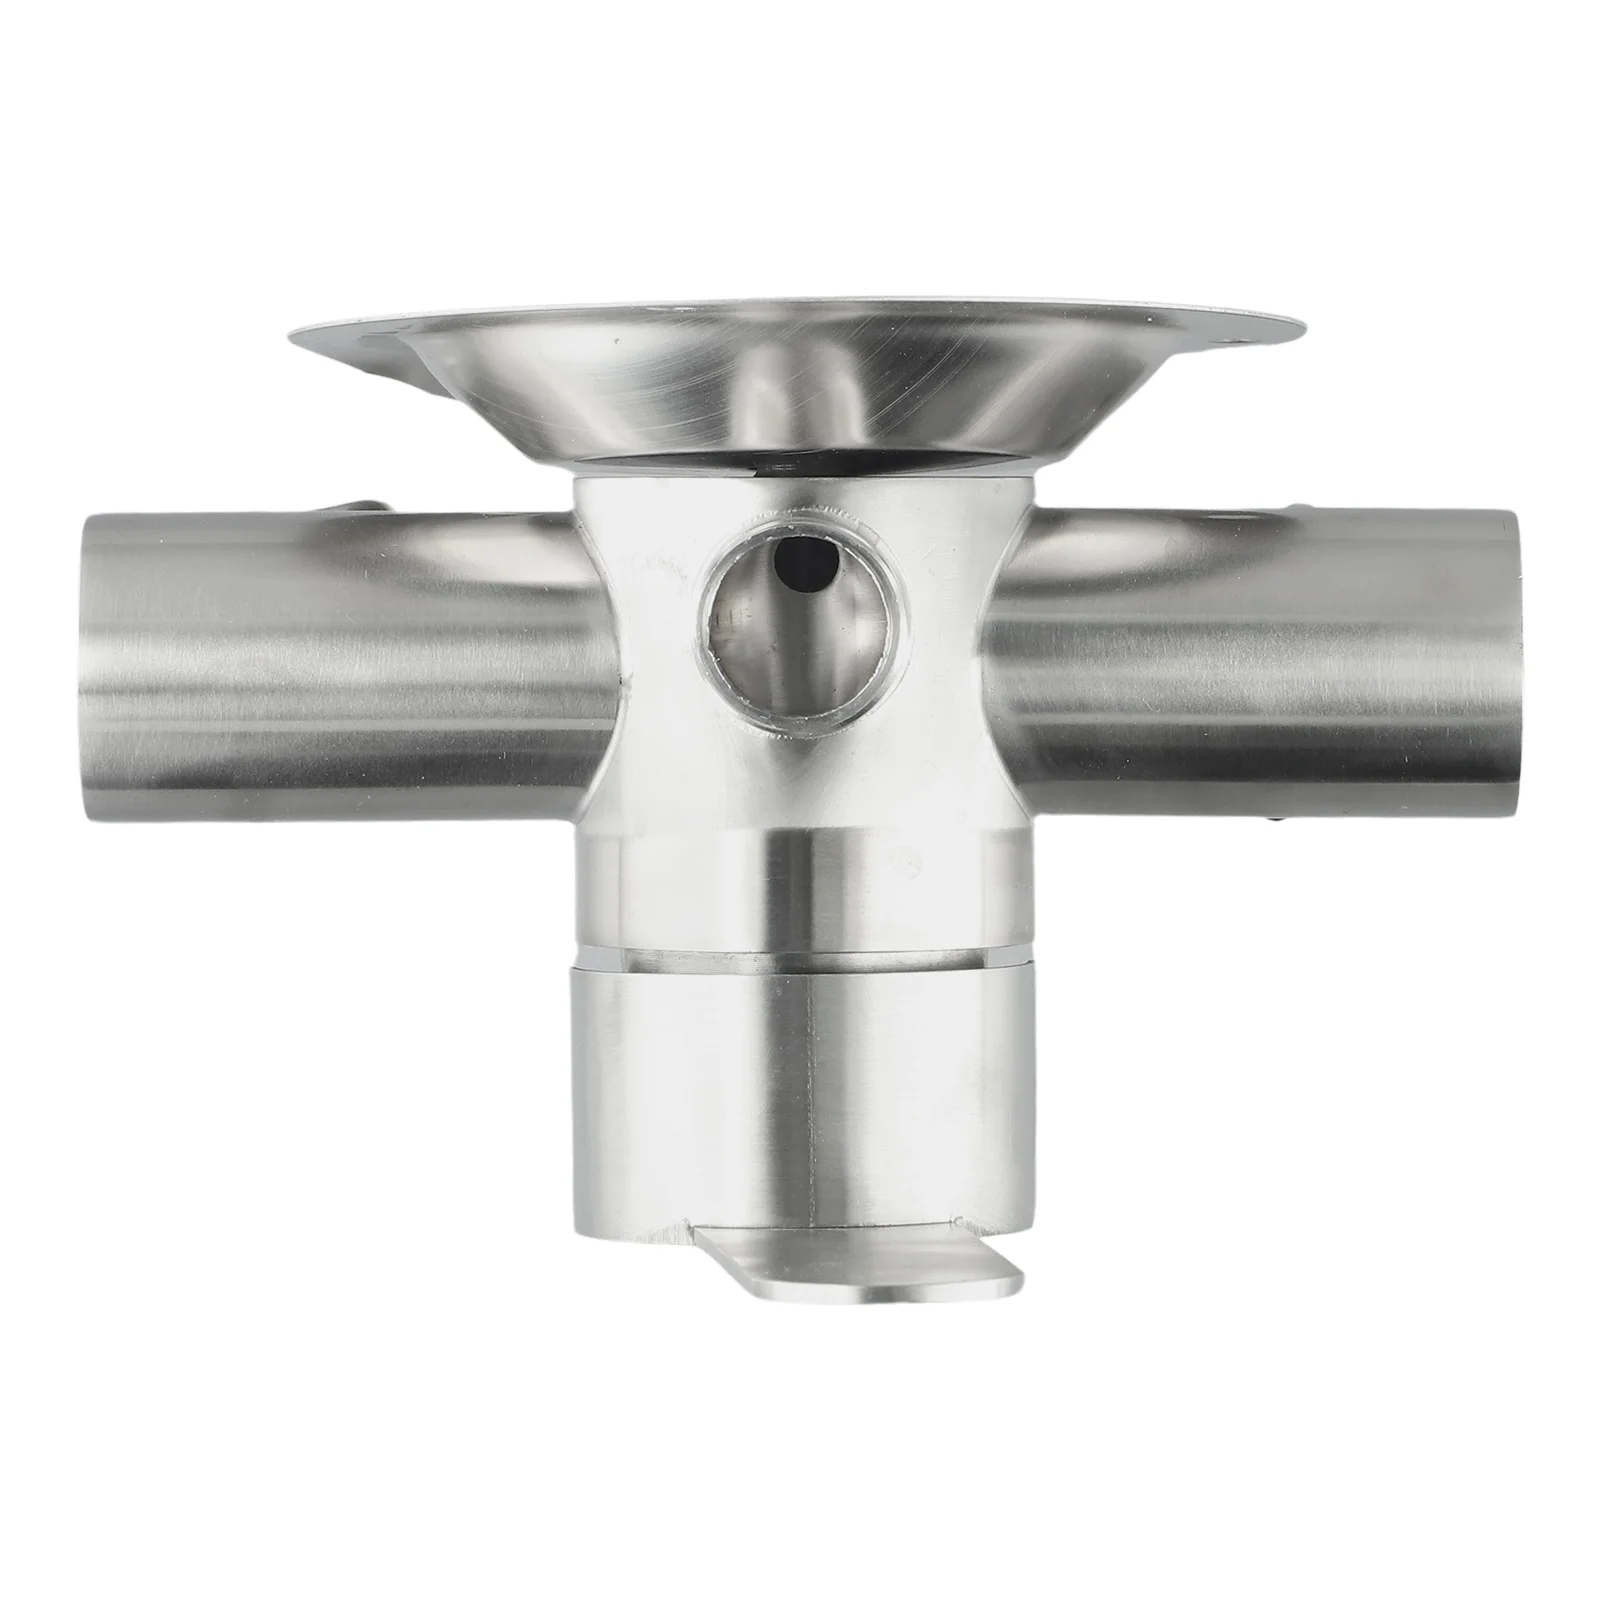 

Shower Faucet Stainless Steel Shower Faucet for Most Shower Equipment with Ceramic Spool and Rubber Sealing Ring